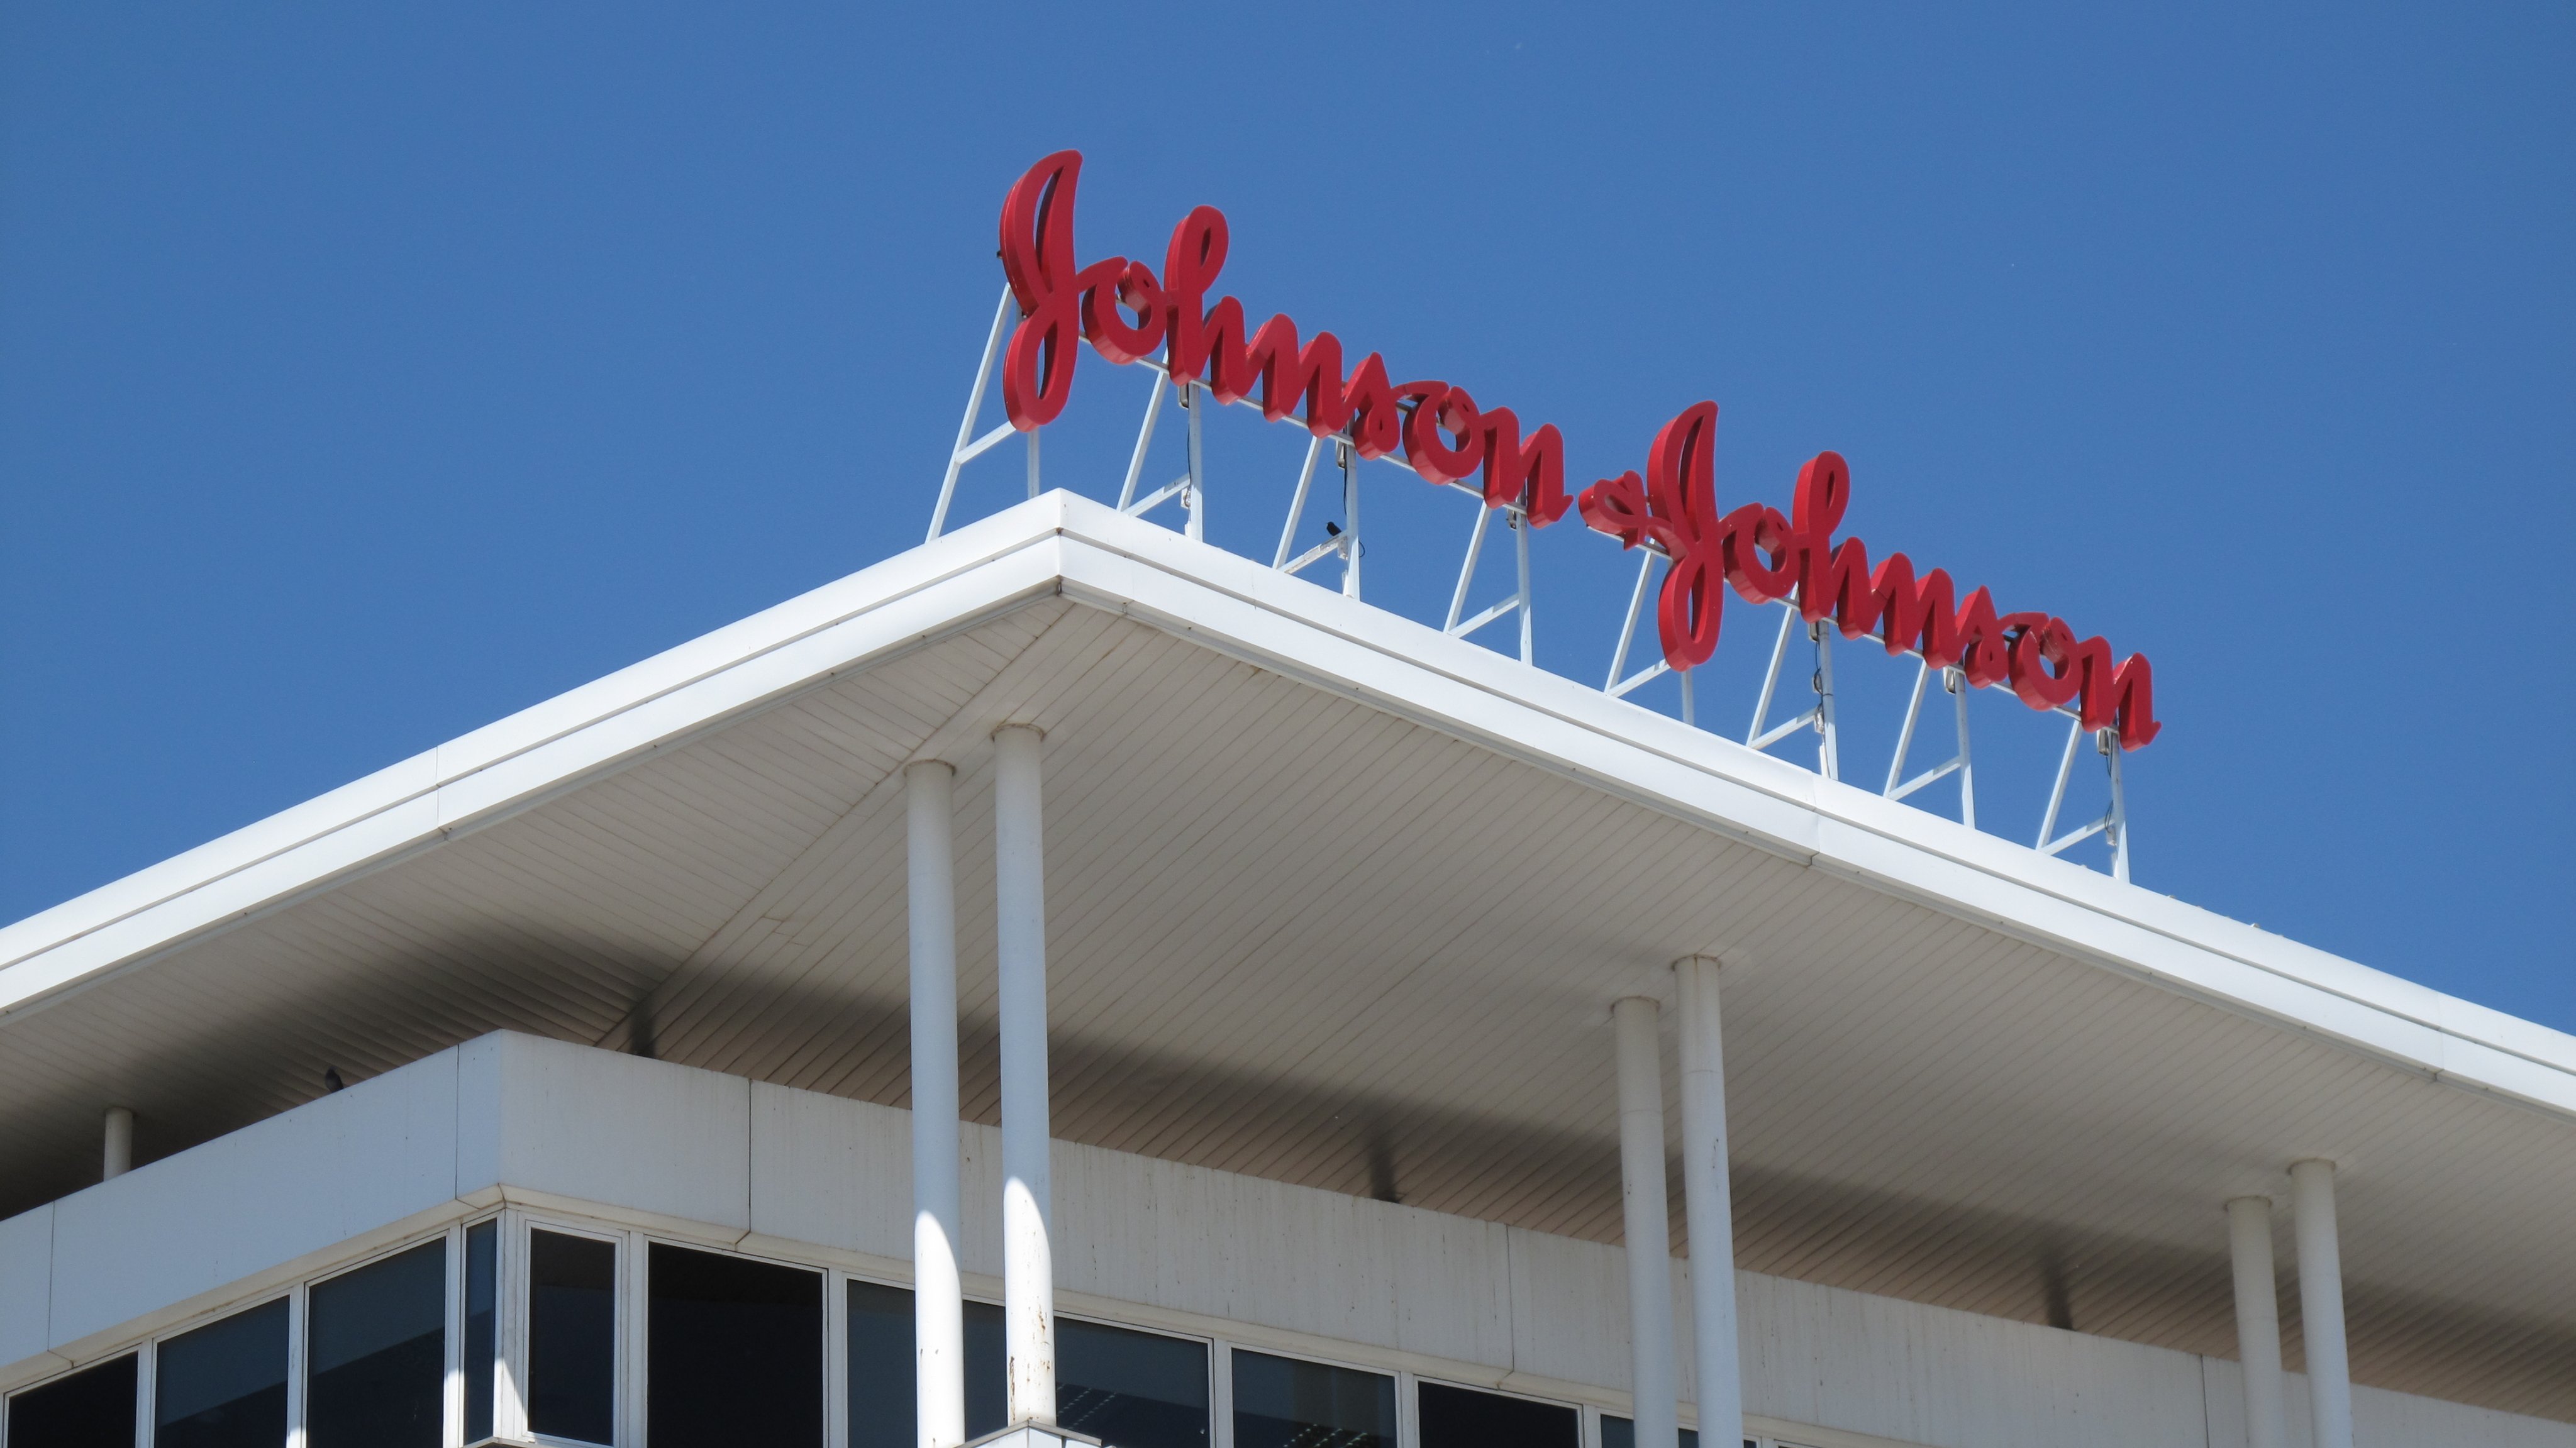 Johnson And Johnson Building in Madrid